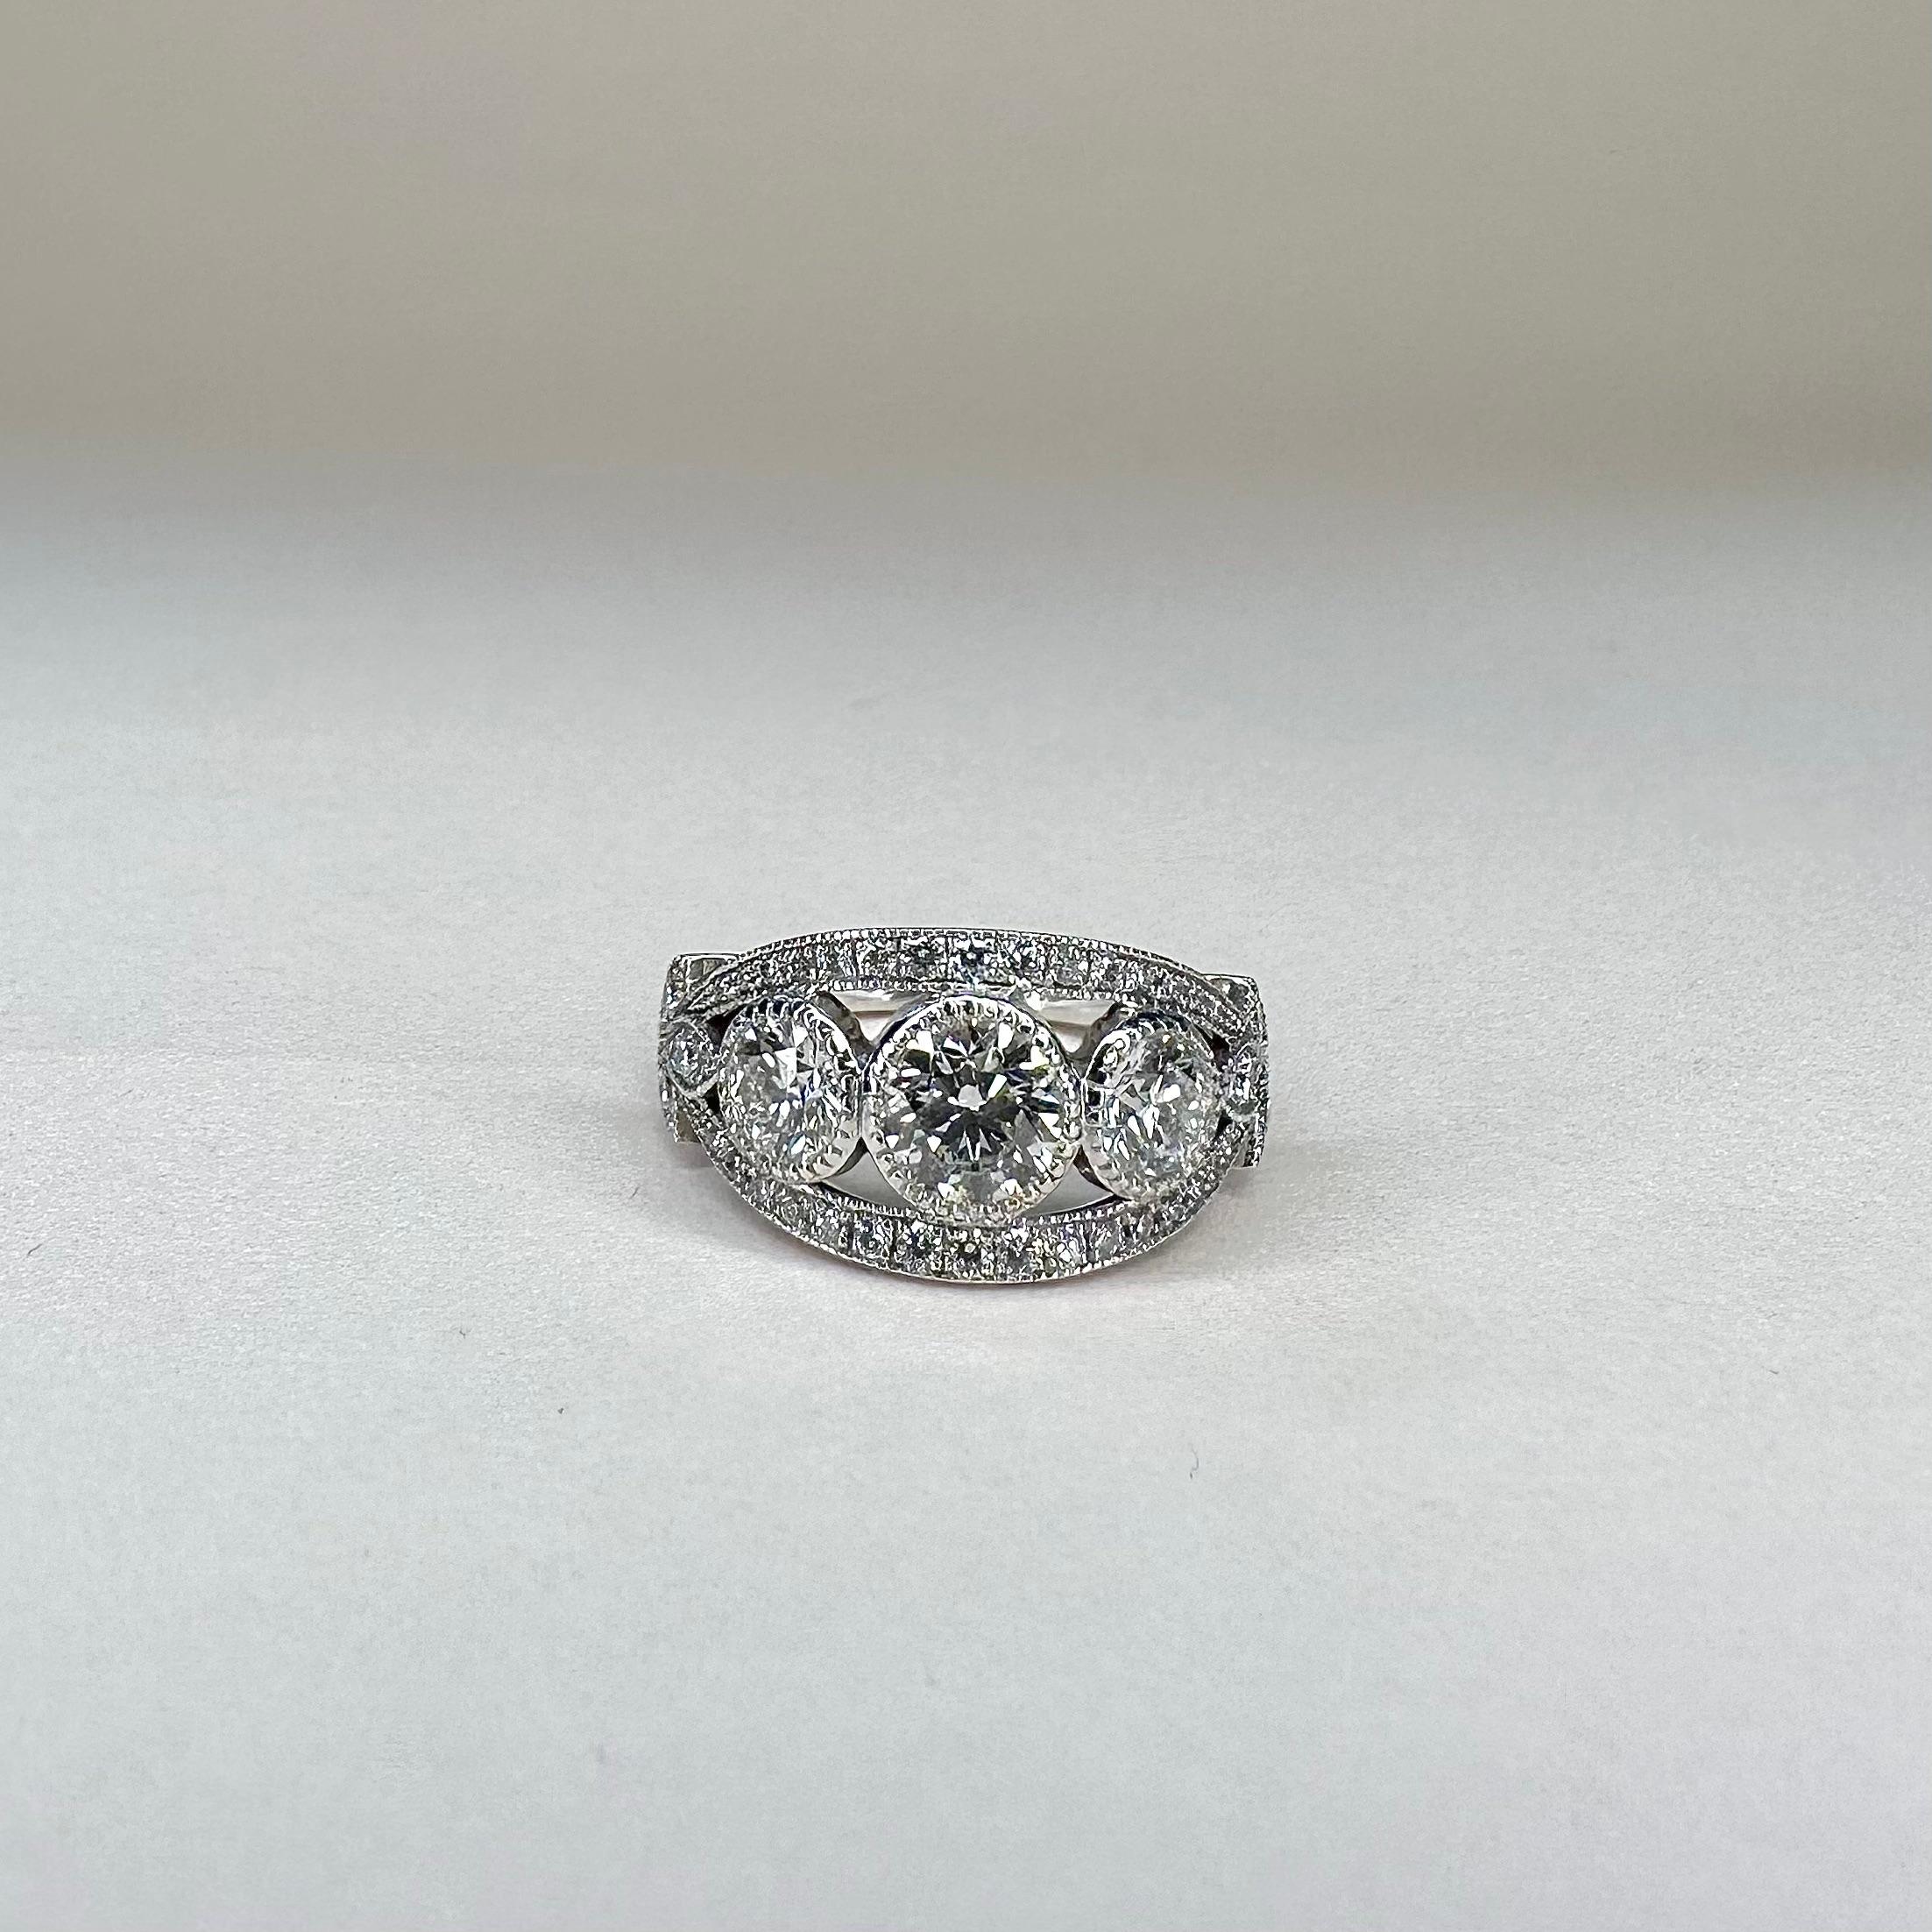 For Sale:  18k White Gold 3 Stone Diamond Ring With a 0.70 Ct And 2x 0.35 Cts Brilliant Cut 2